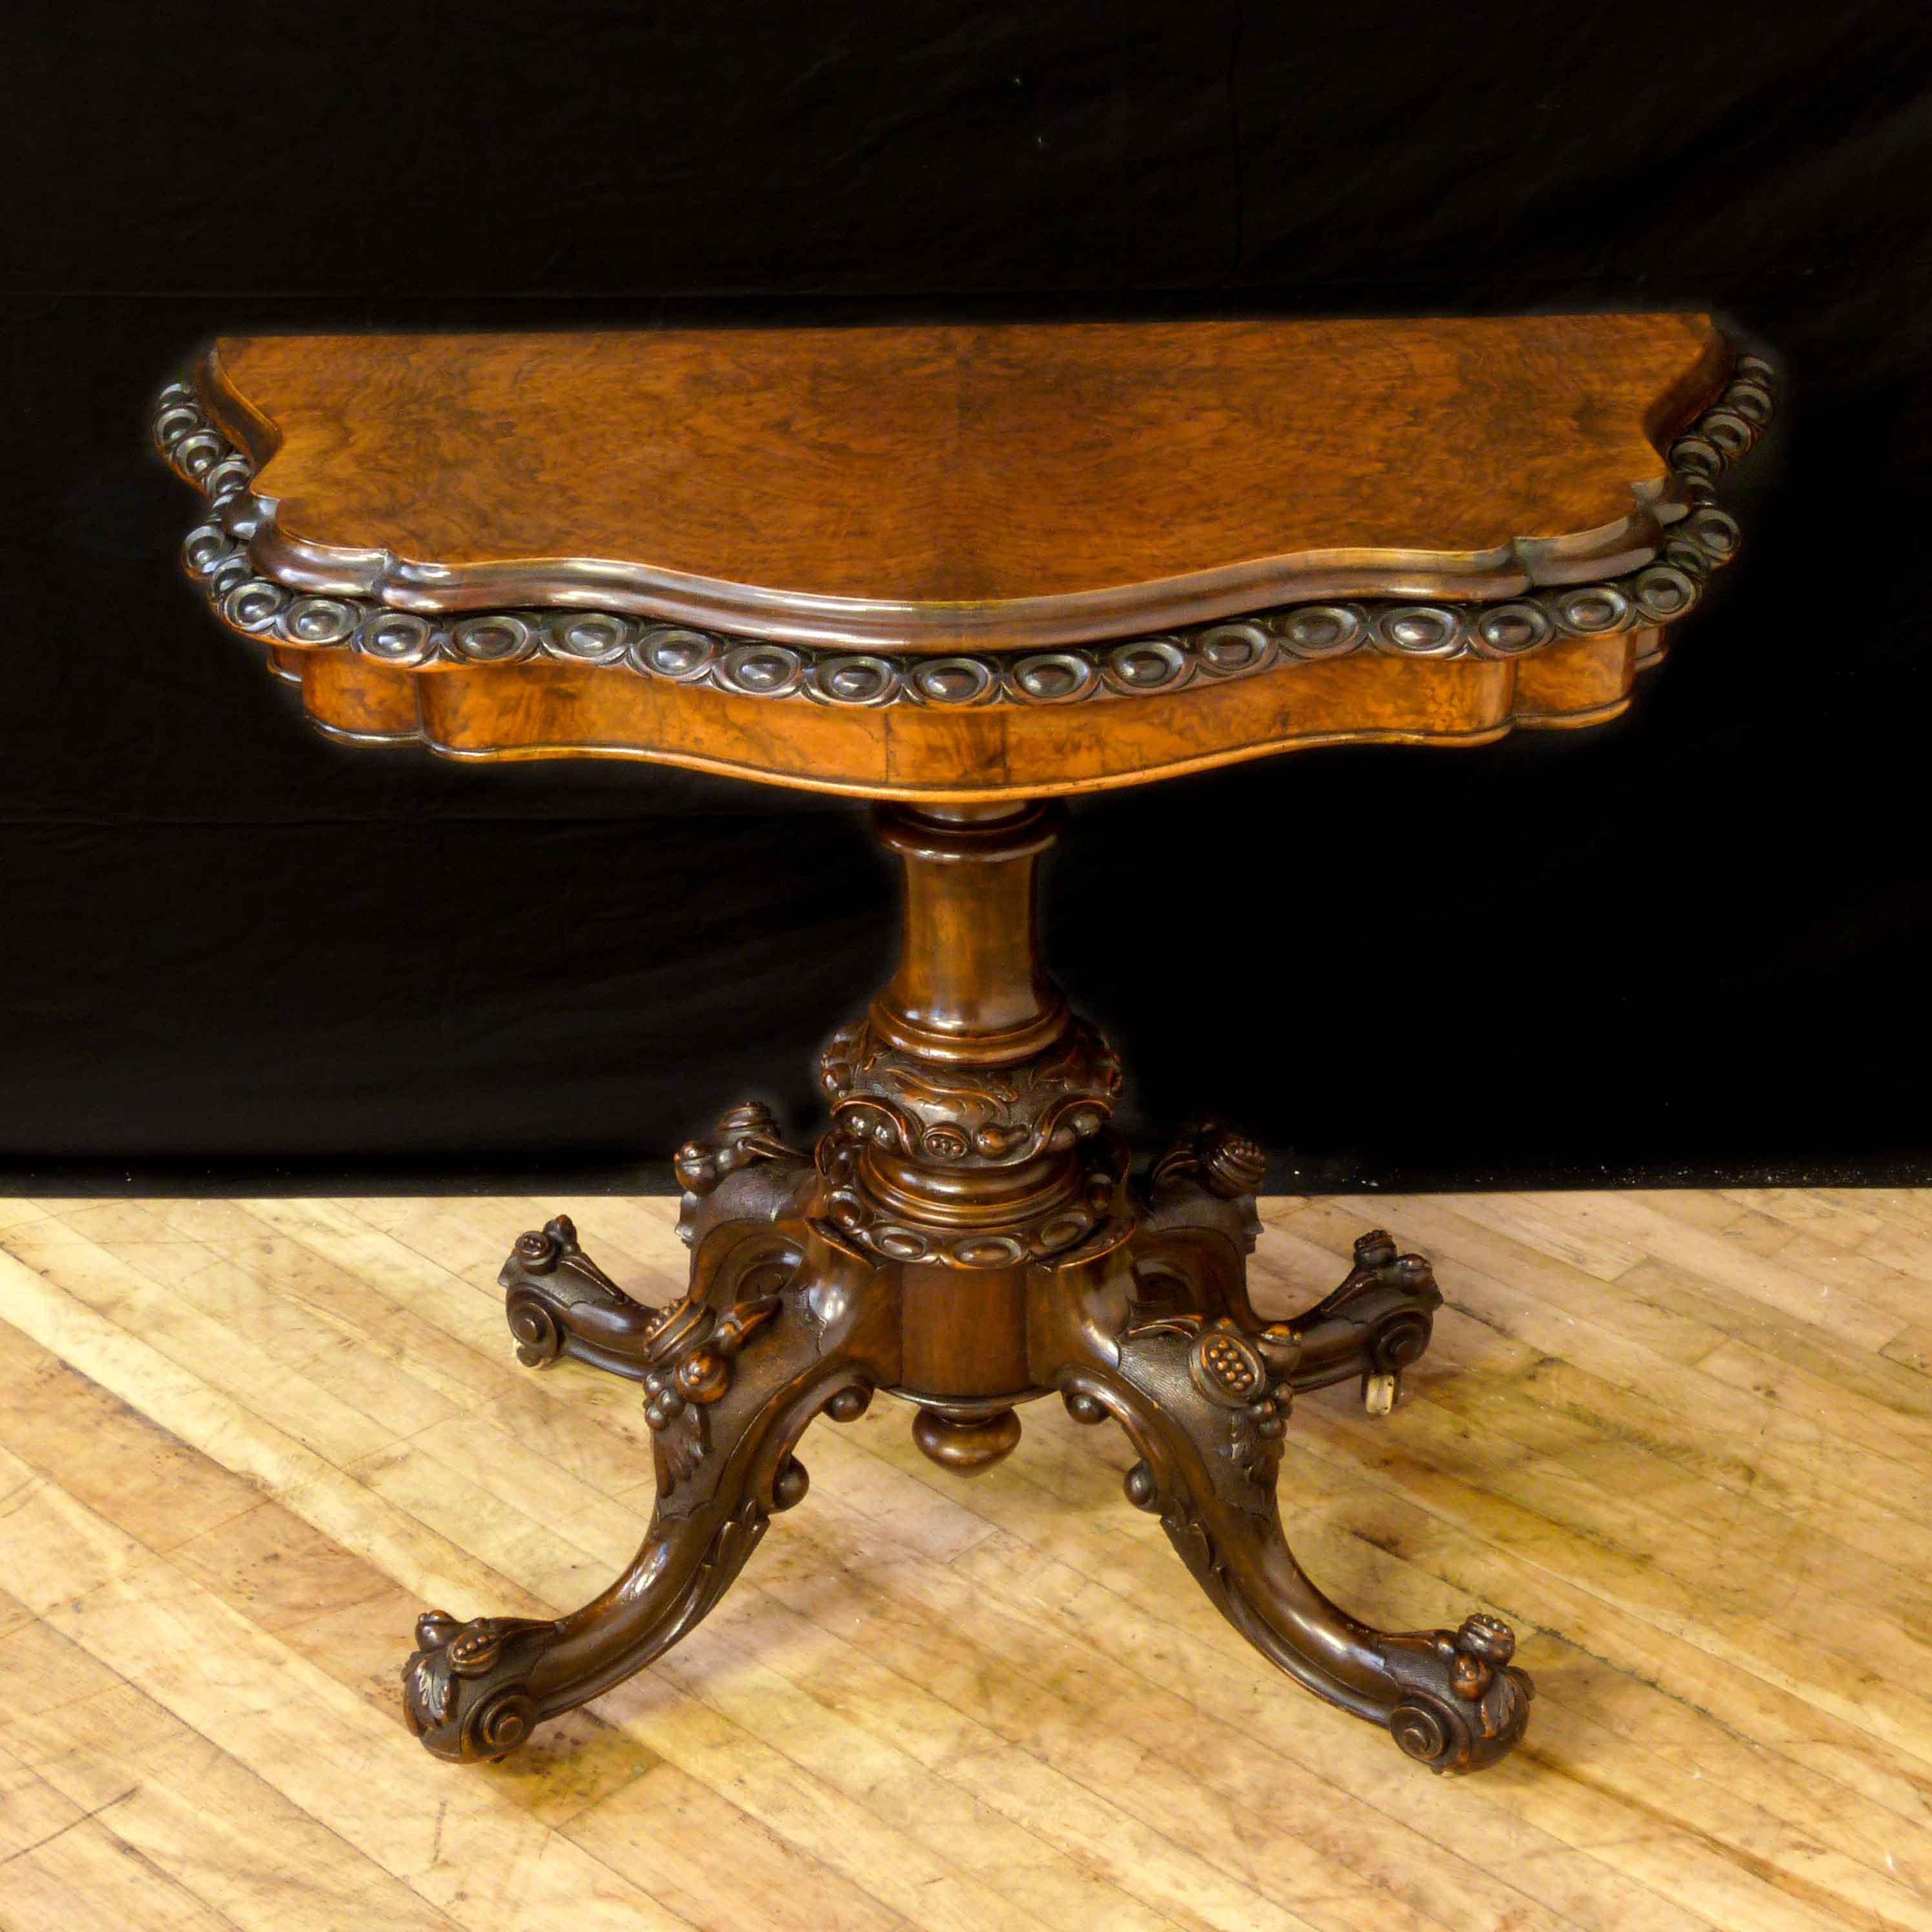 This is a high quality piece of Victorian furniture. The cabriole legs are deeply carved with foliage and fruits still retaining the original castors. Set on a well turned central column which sets off the serpentine burr walnut top that is finely